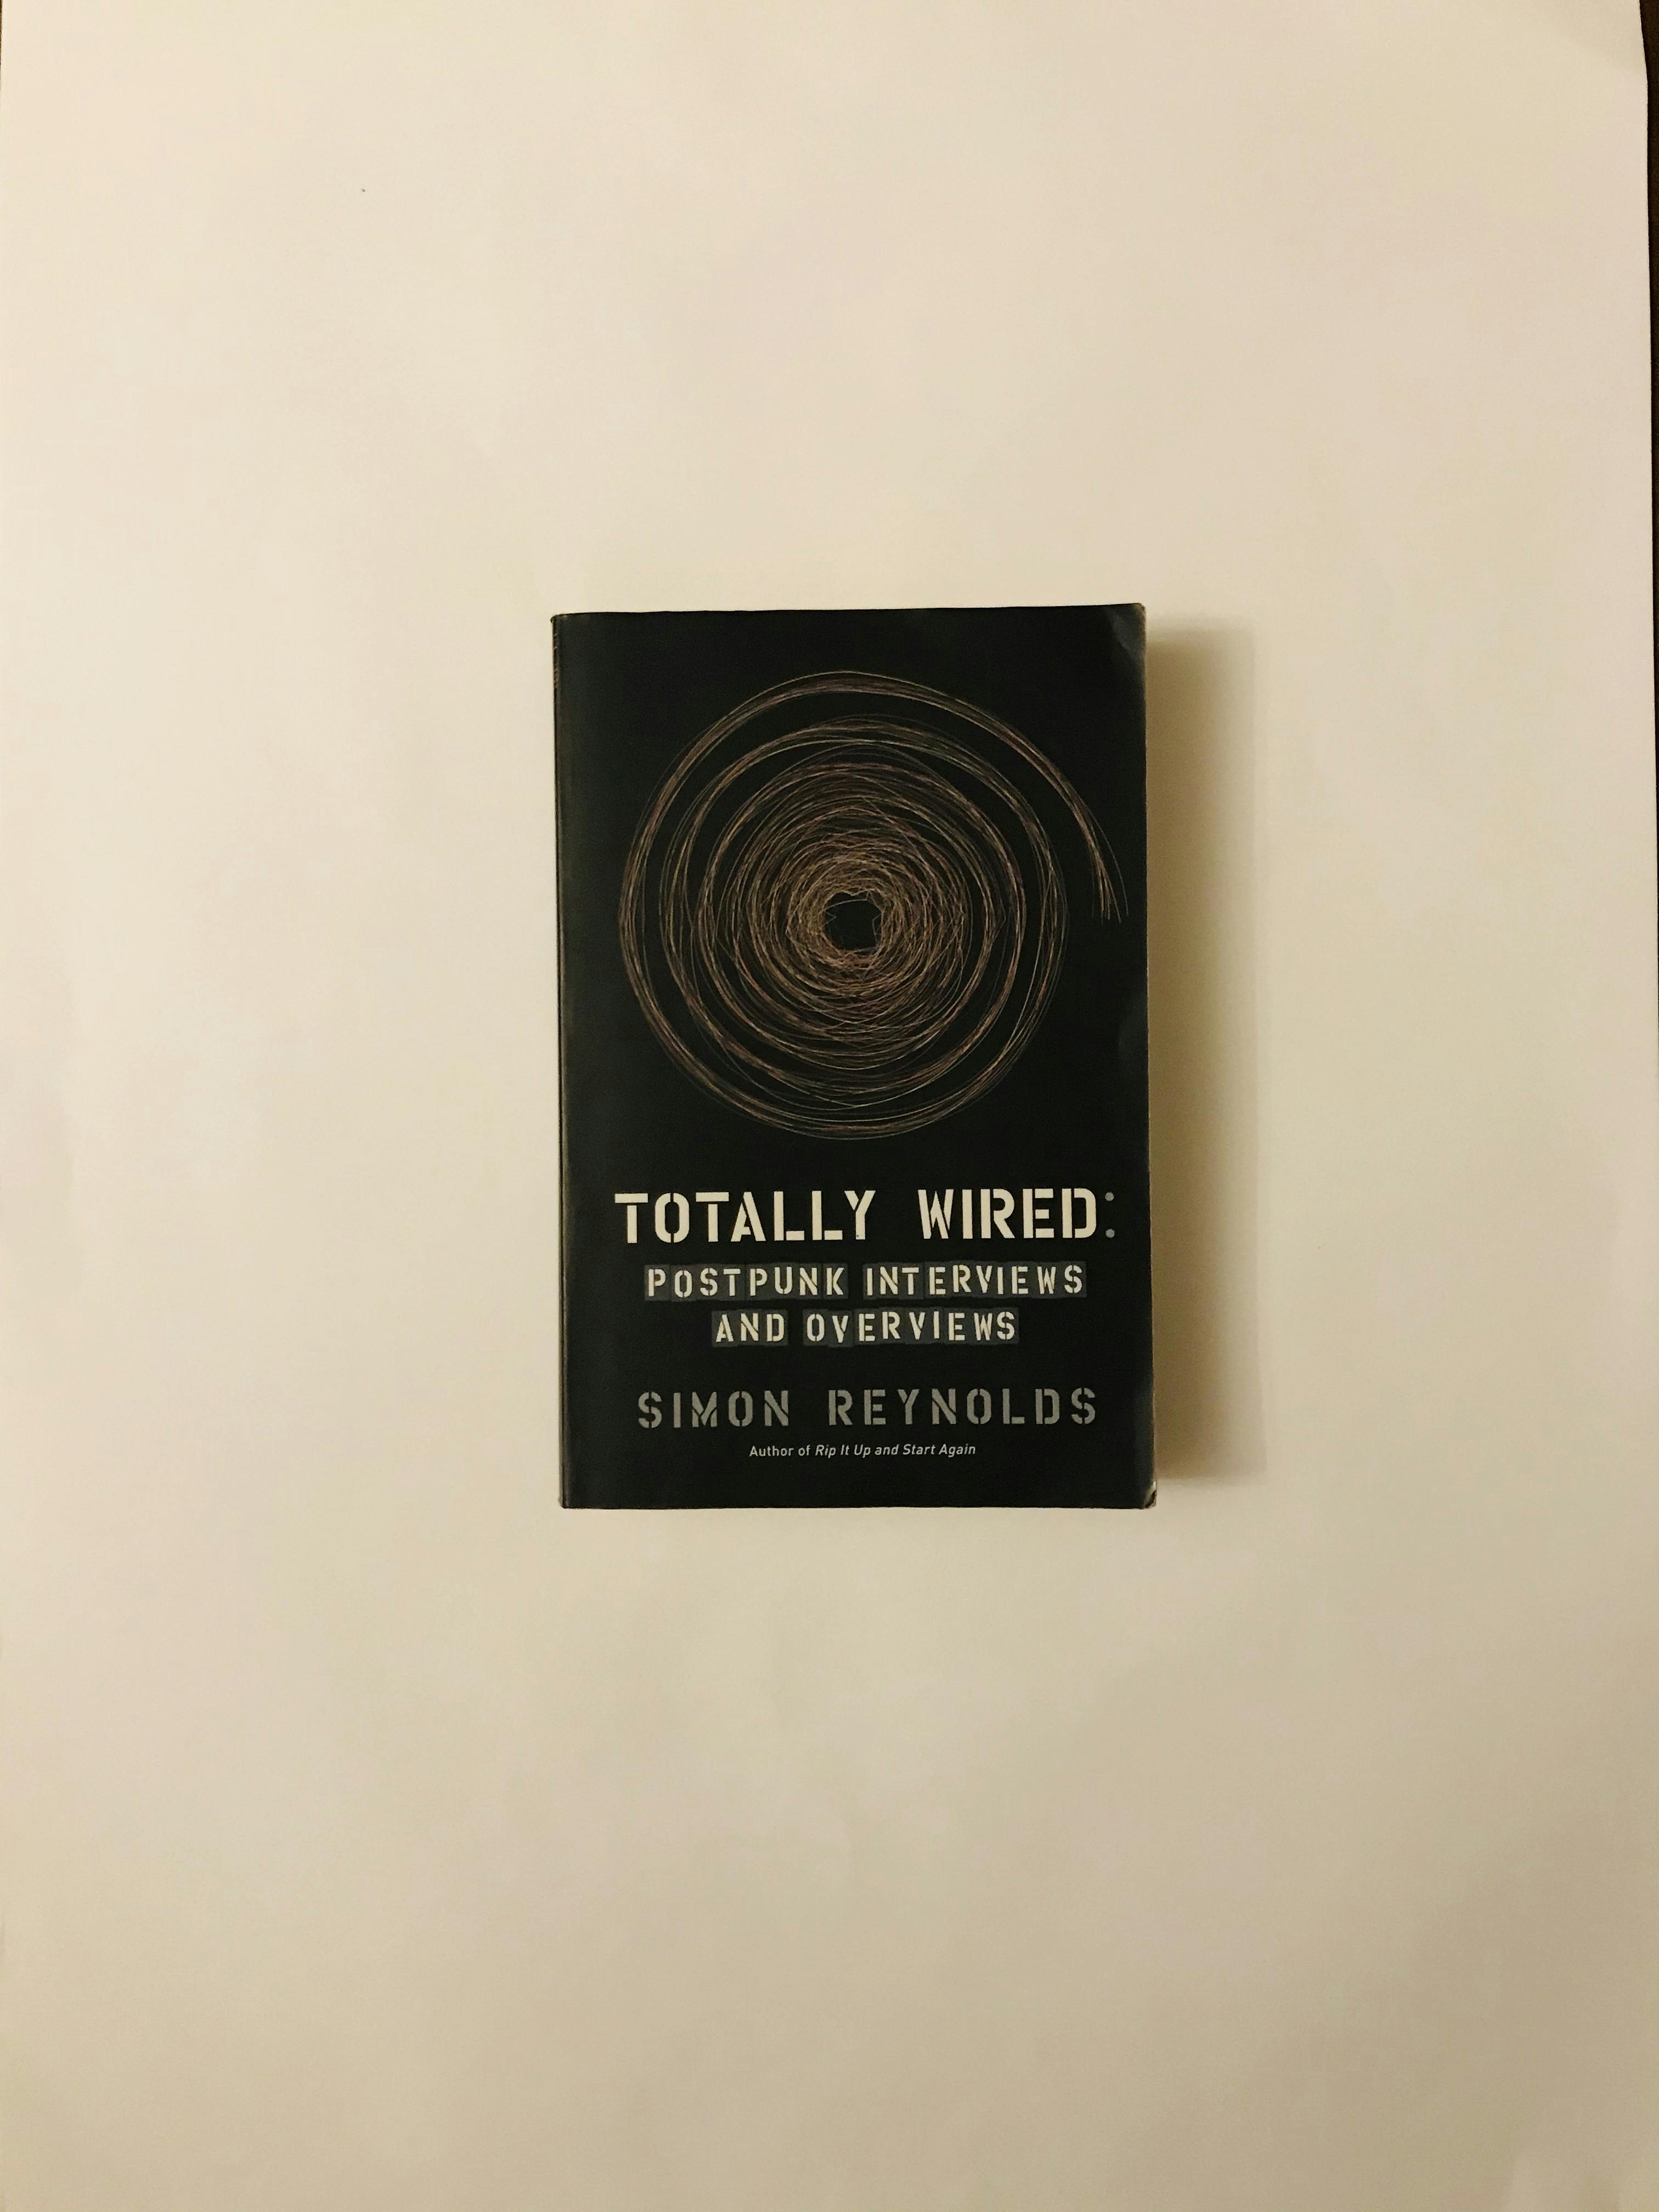 "TOTALLY WIRED", de Simon Reynolds